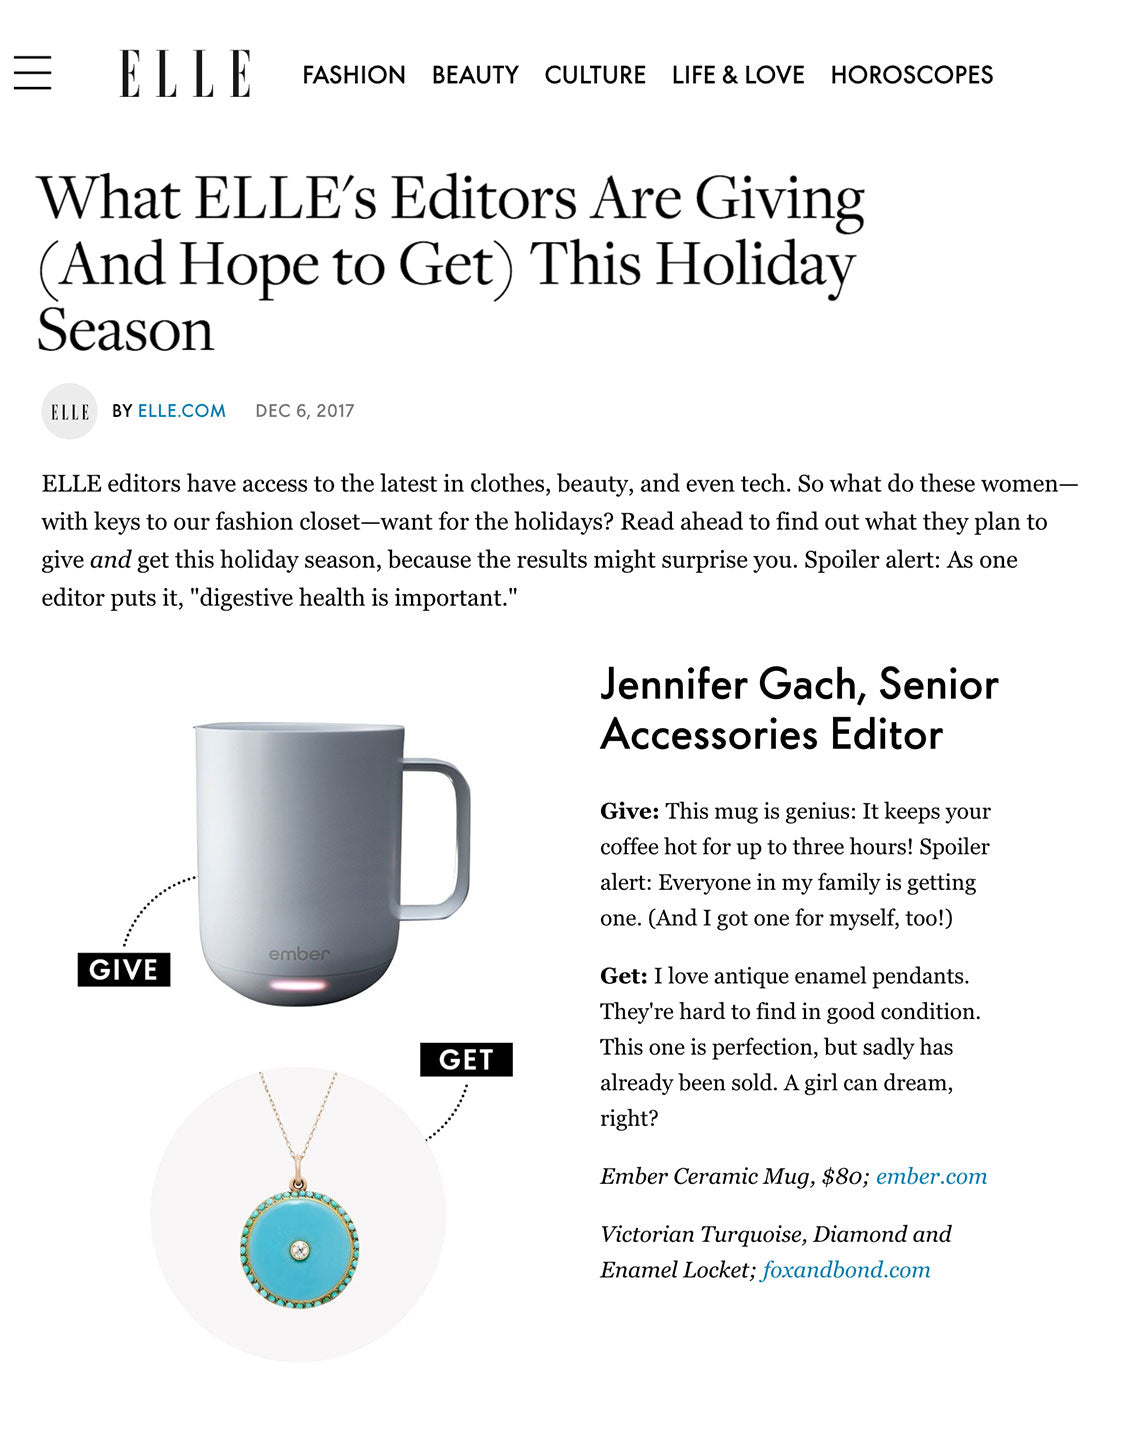 ELLE.com: What ELLE's Editors Are Giving (And Hope to Get) This Holiday Season